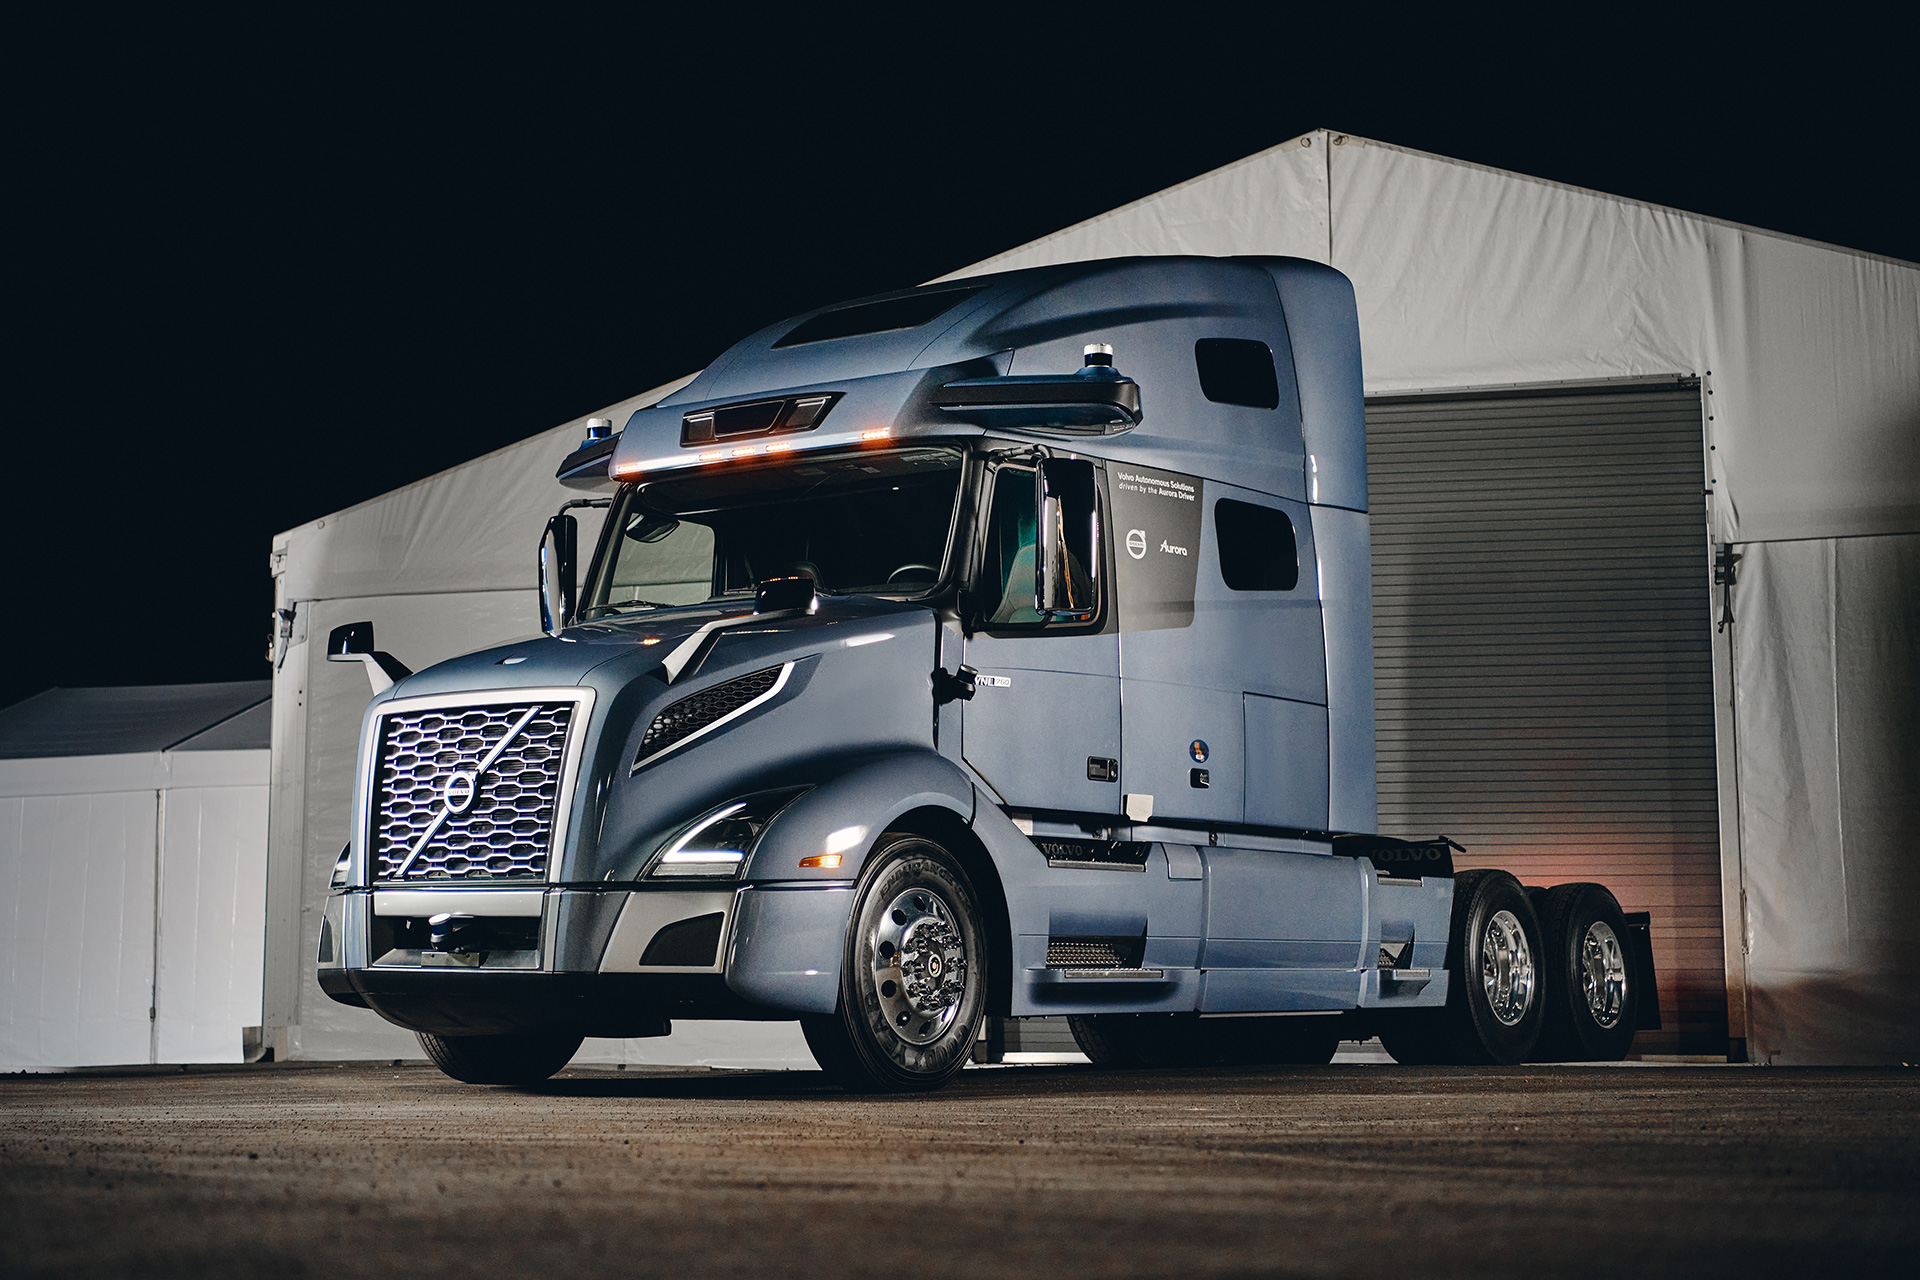 Volvo unveils prototype self-driving semi truck constructed for long hauls